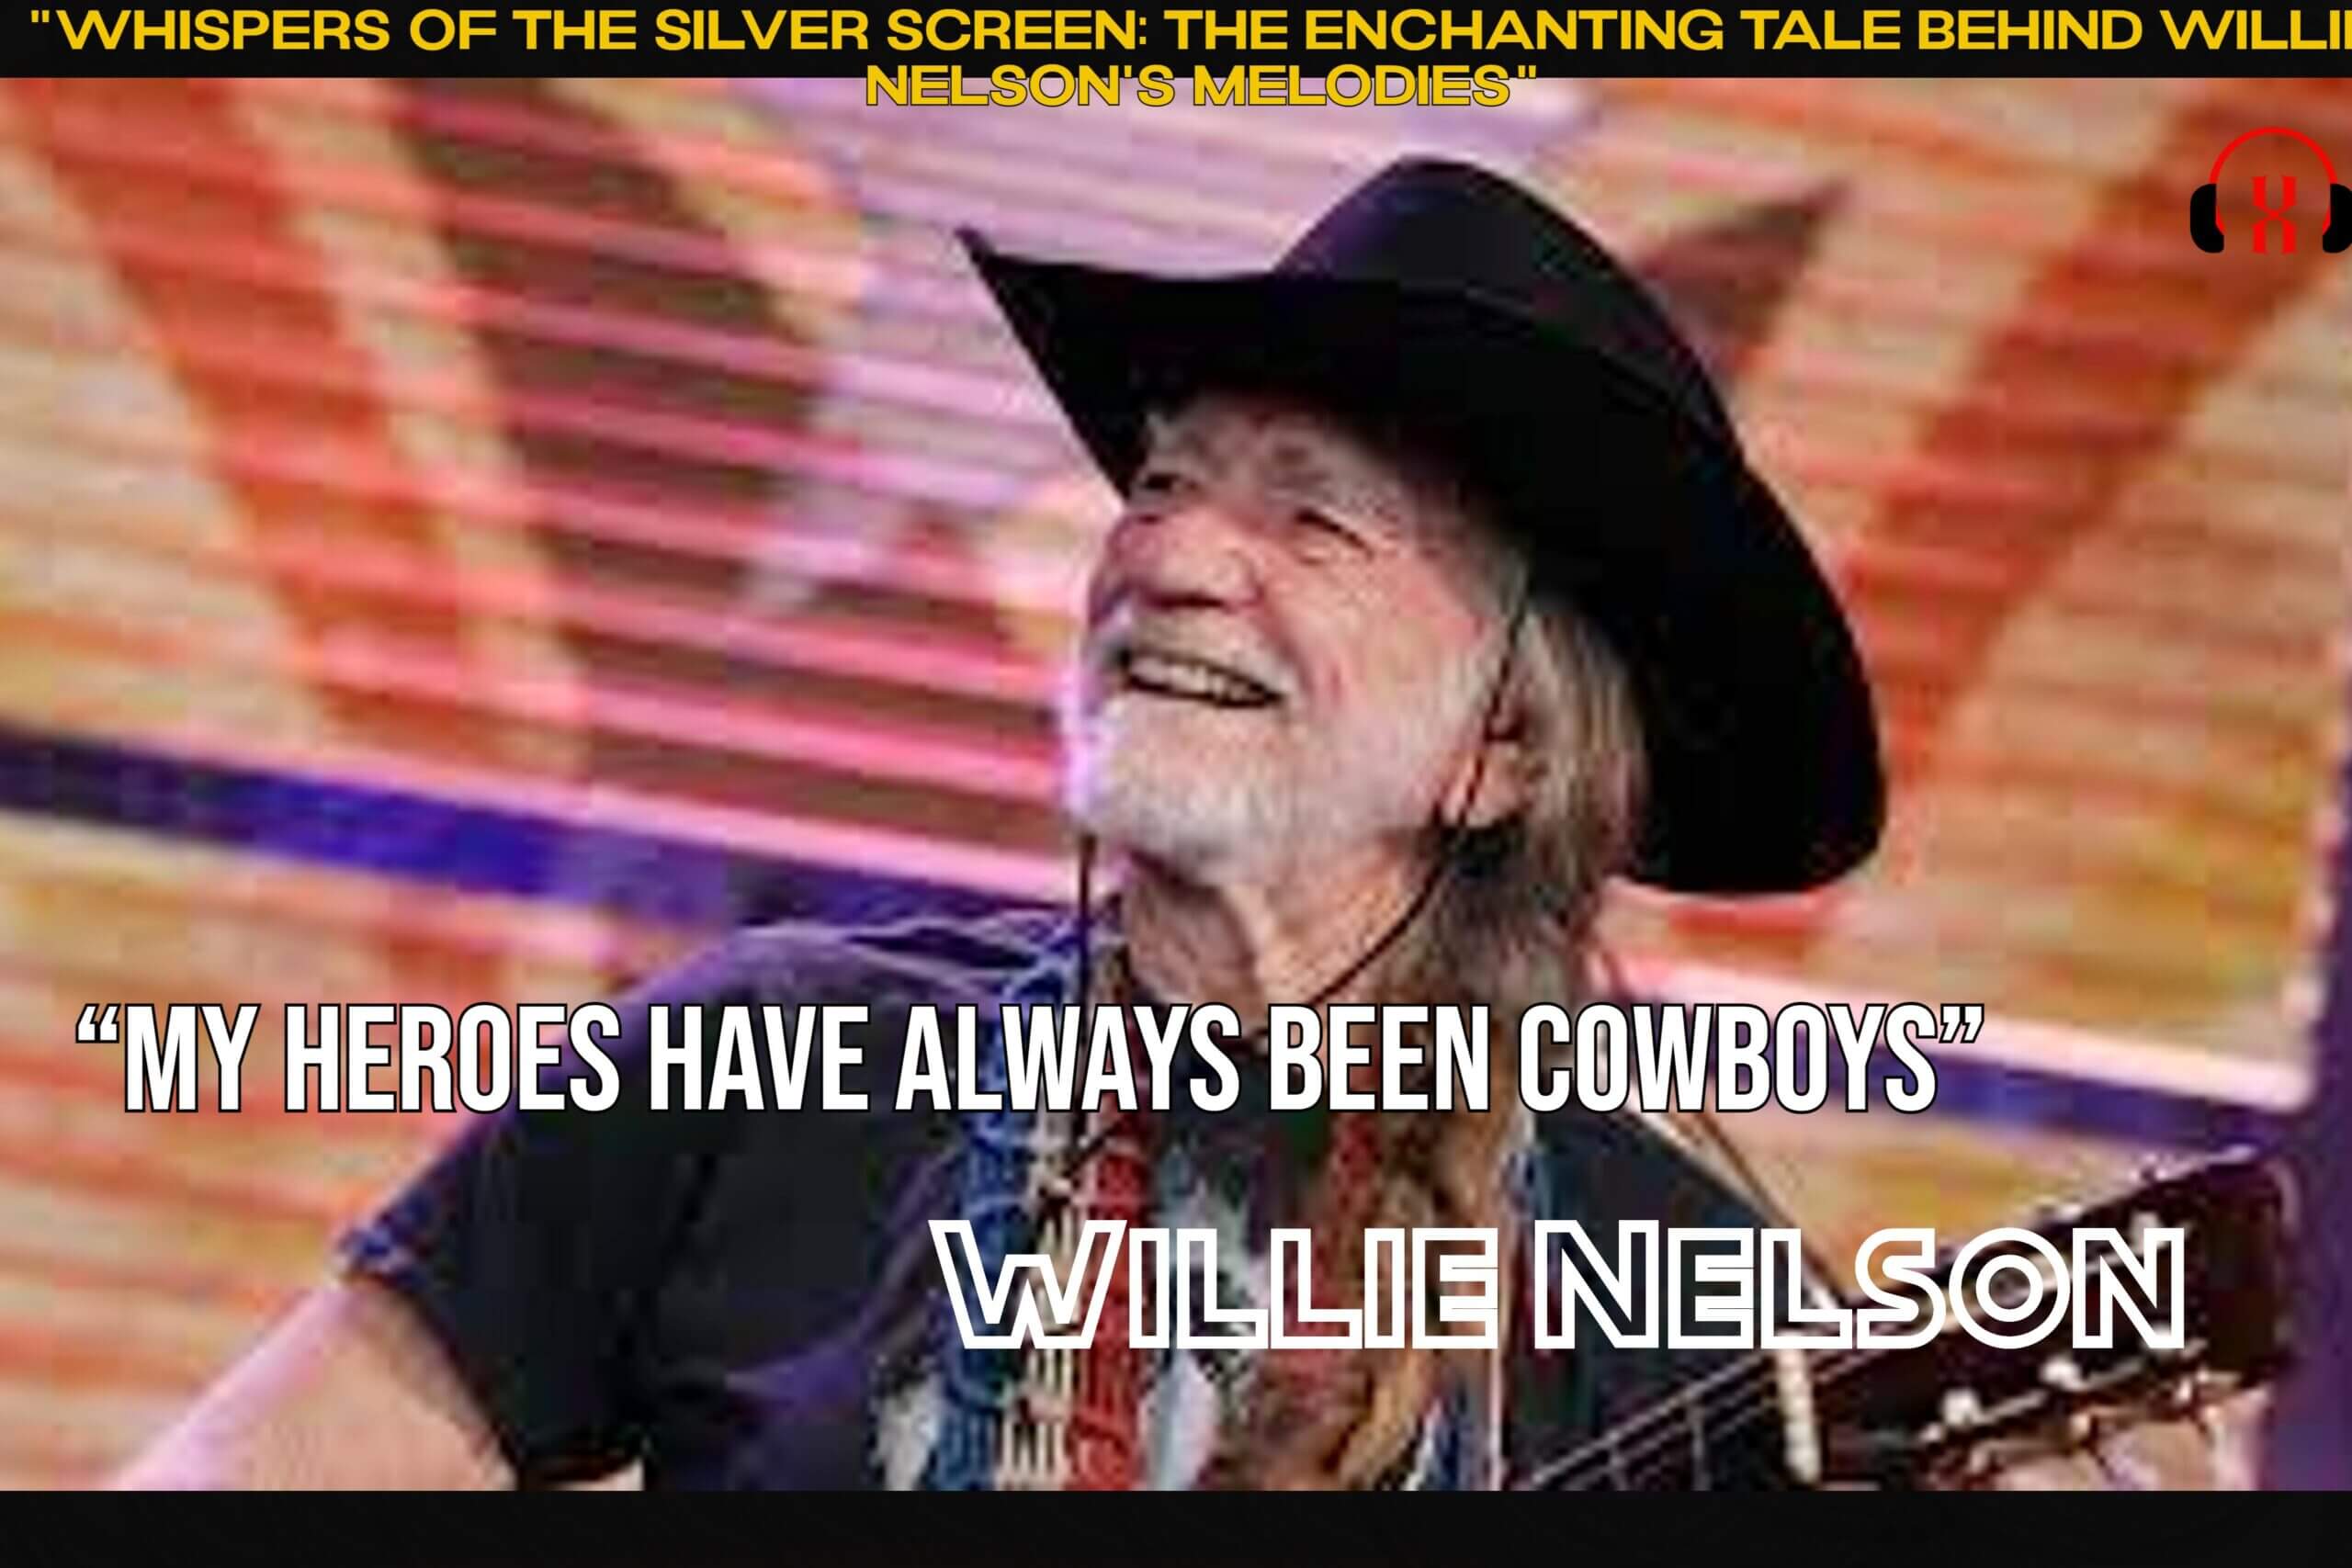 “Whispers of the Silver Screen: The Enchanting Tale Behind Willie Nelson’s Melodies”